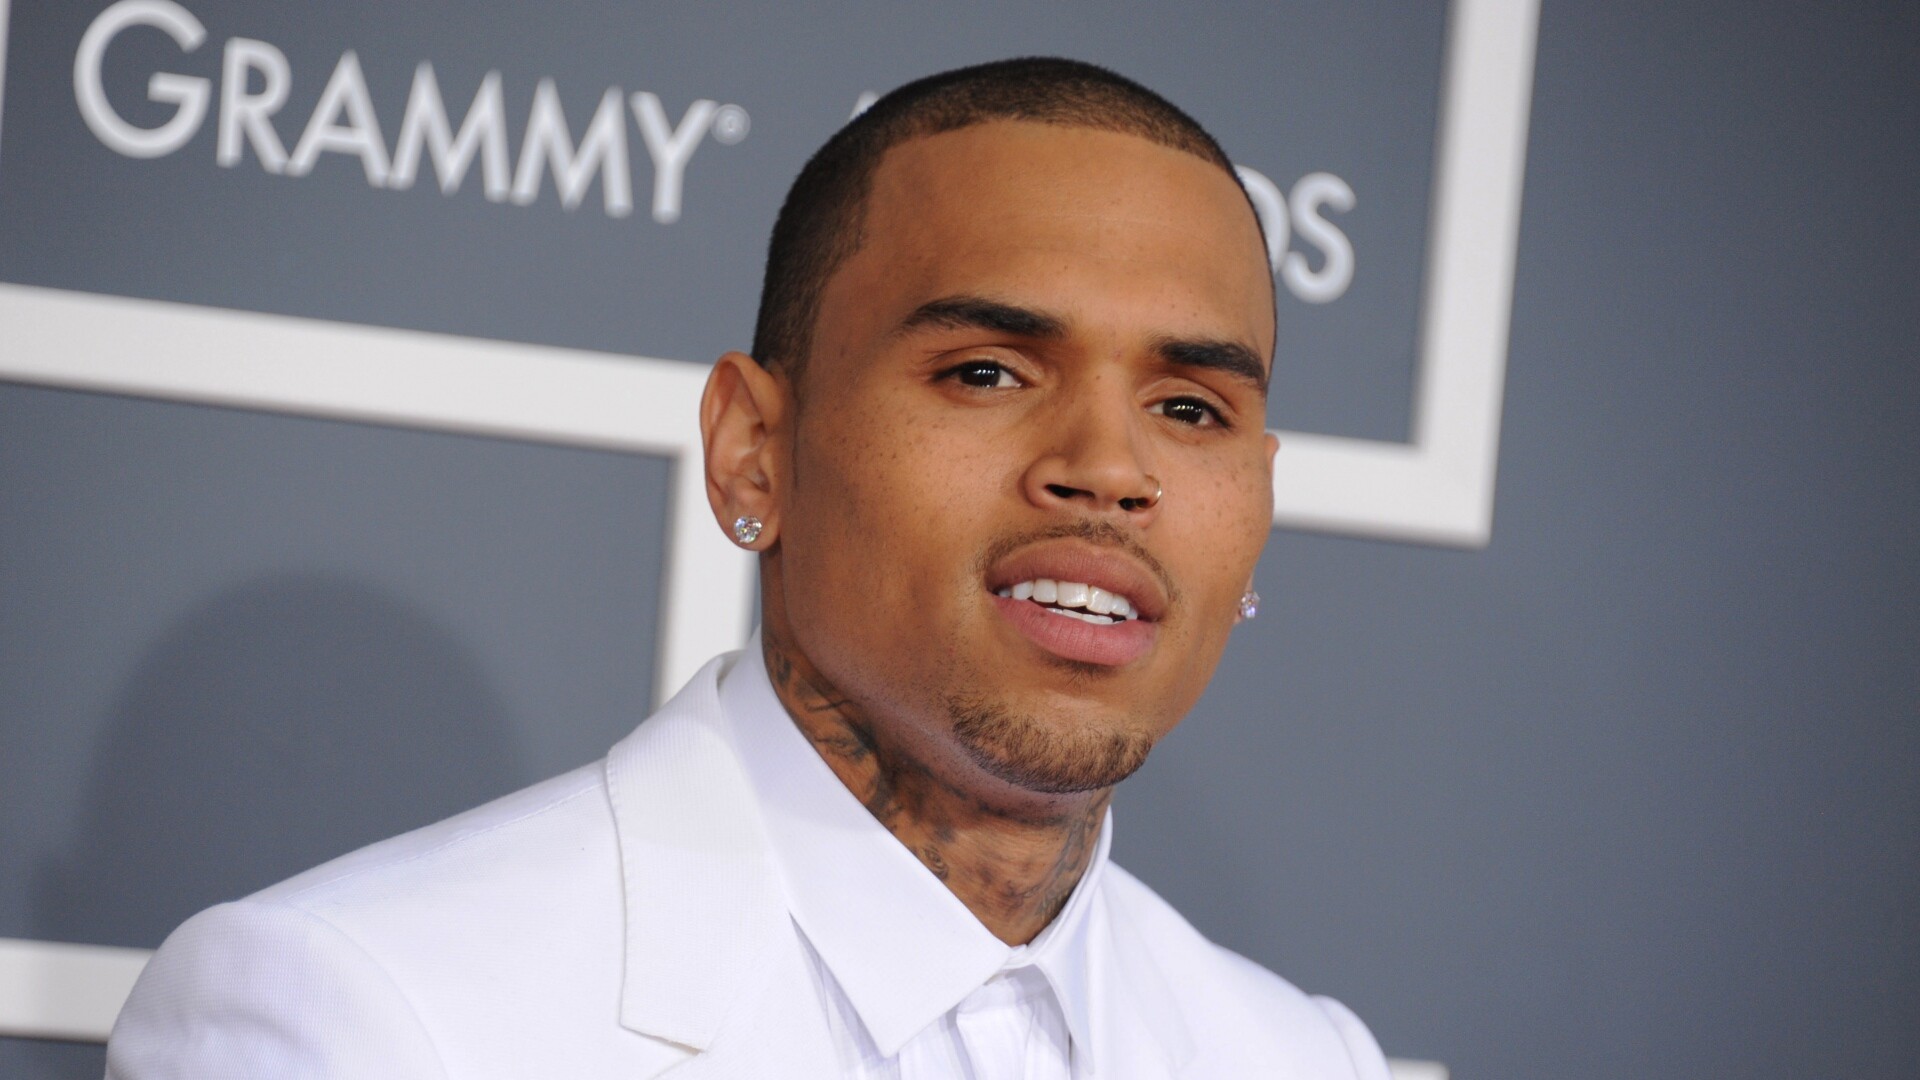 Chris Brown: Ranked third on Billboard's top R&B/Hip-Hop artists of the 2010s decade chart, behind Drake and Rihanna. 1920x1080 Full HD Wallpaper.